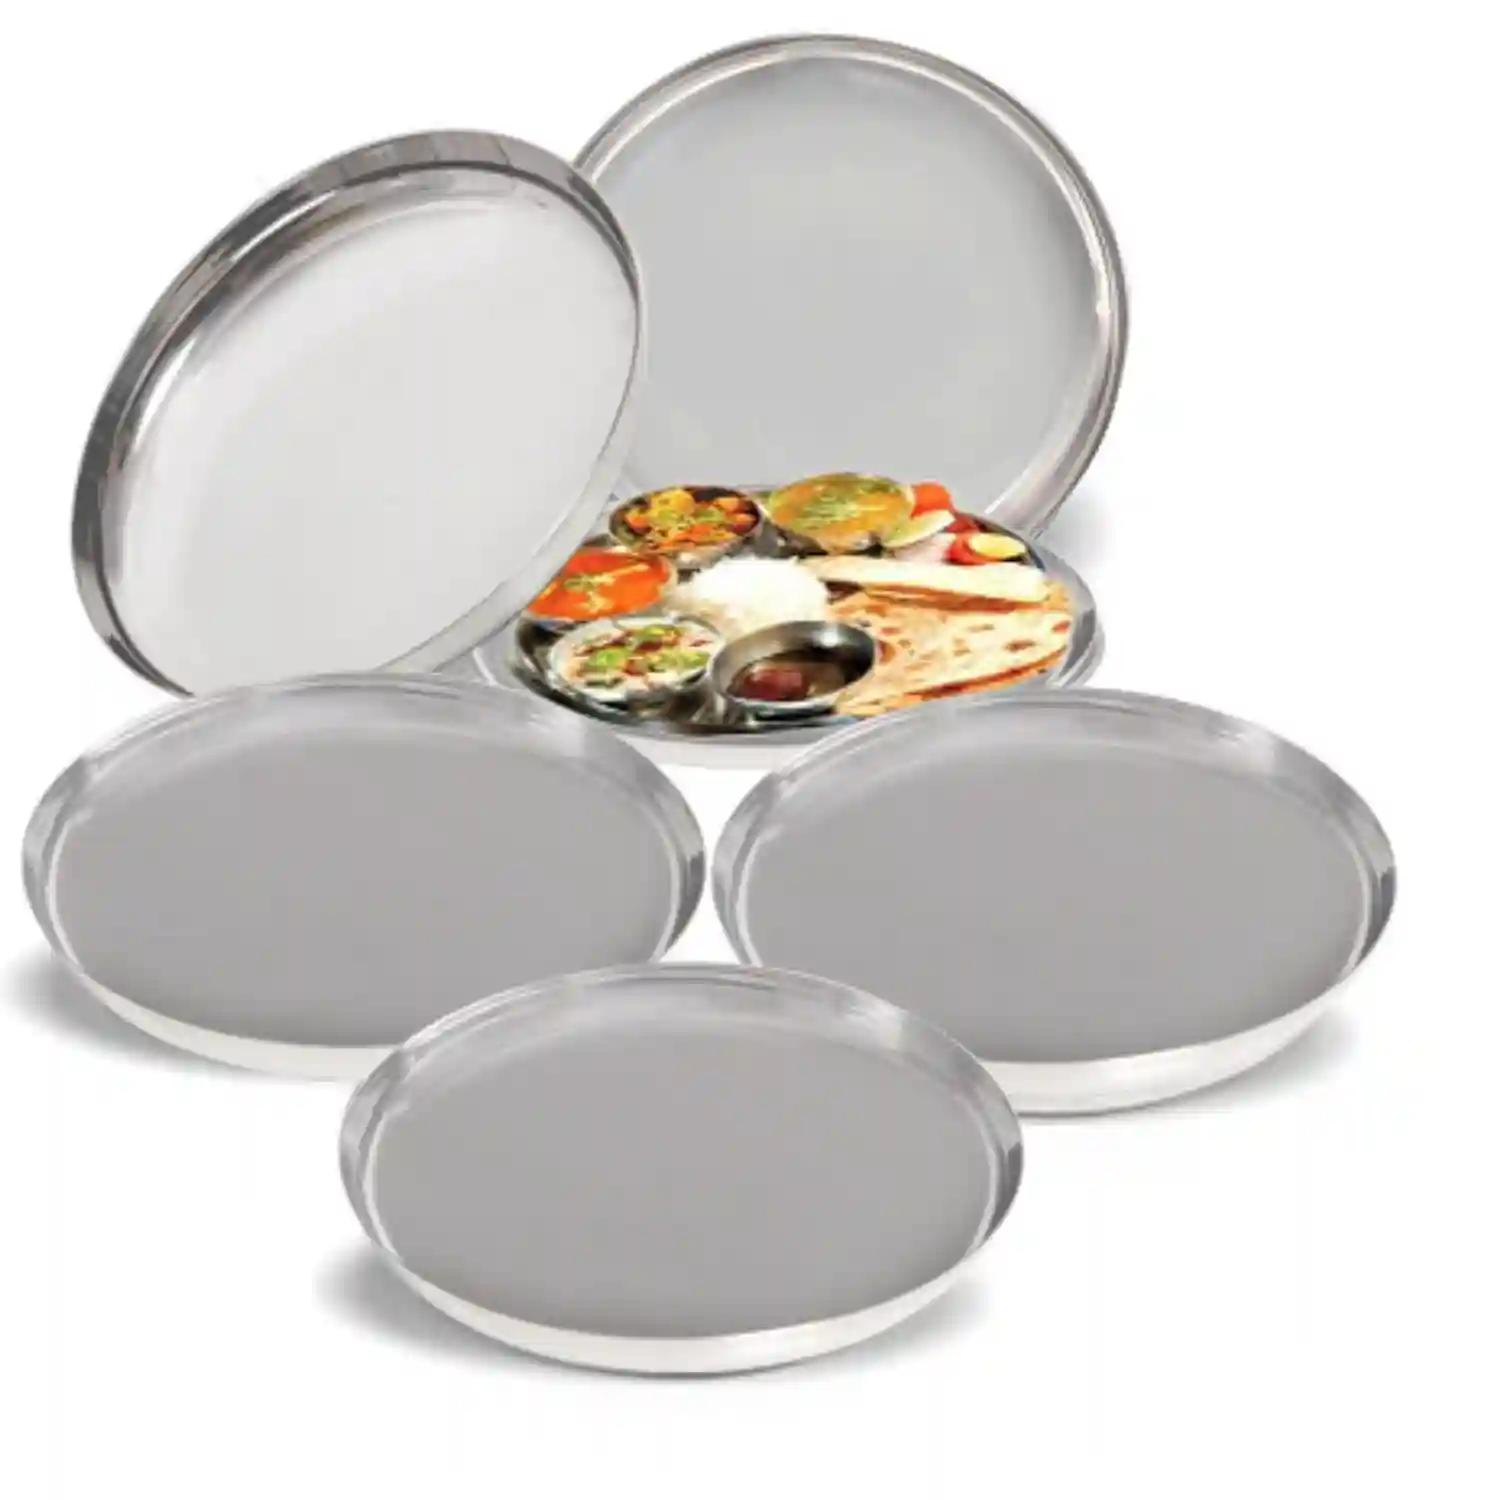 LiMETRO STEEL Stainless Steel Heavy Gauge Dinner Plates / Bhojan Thali / Lunch Plates / Dinner Set ( 30 cm) (Greater Than 10", 6 Pieces)